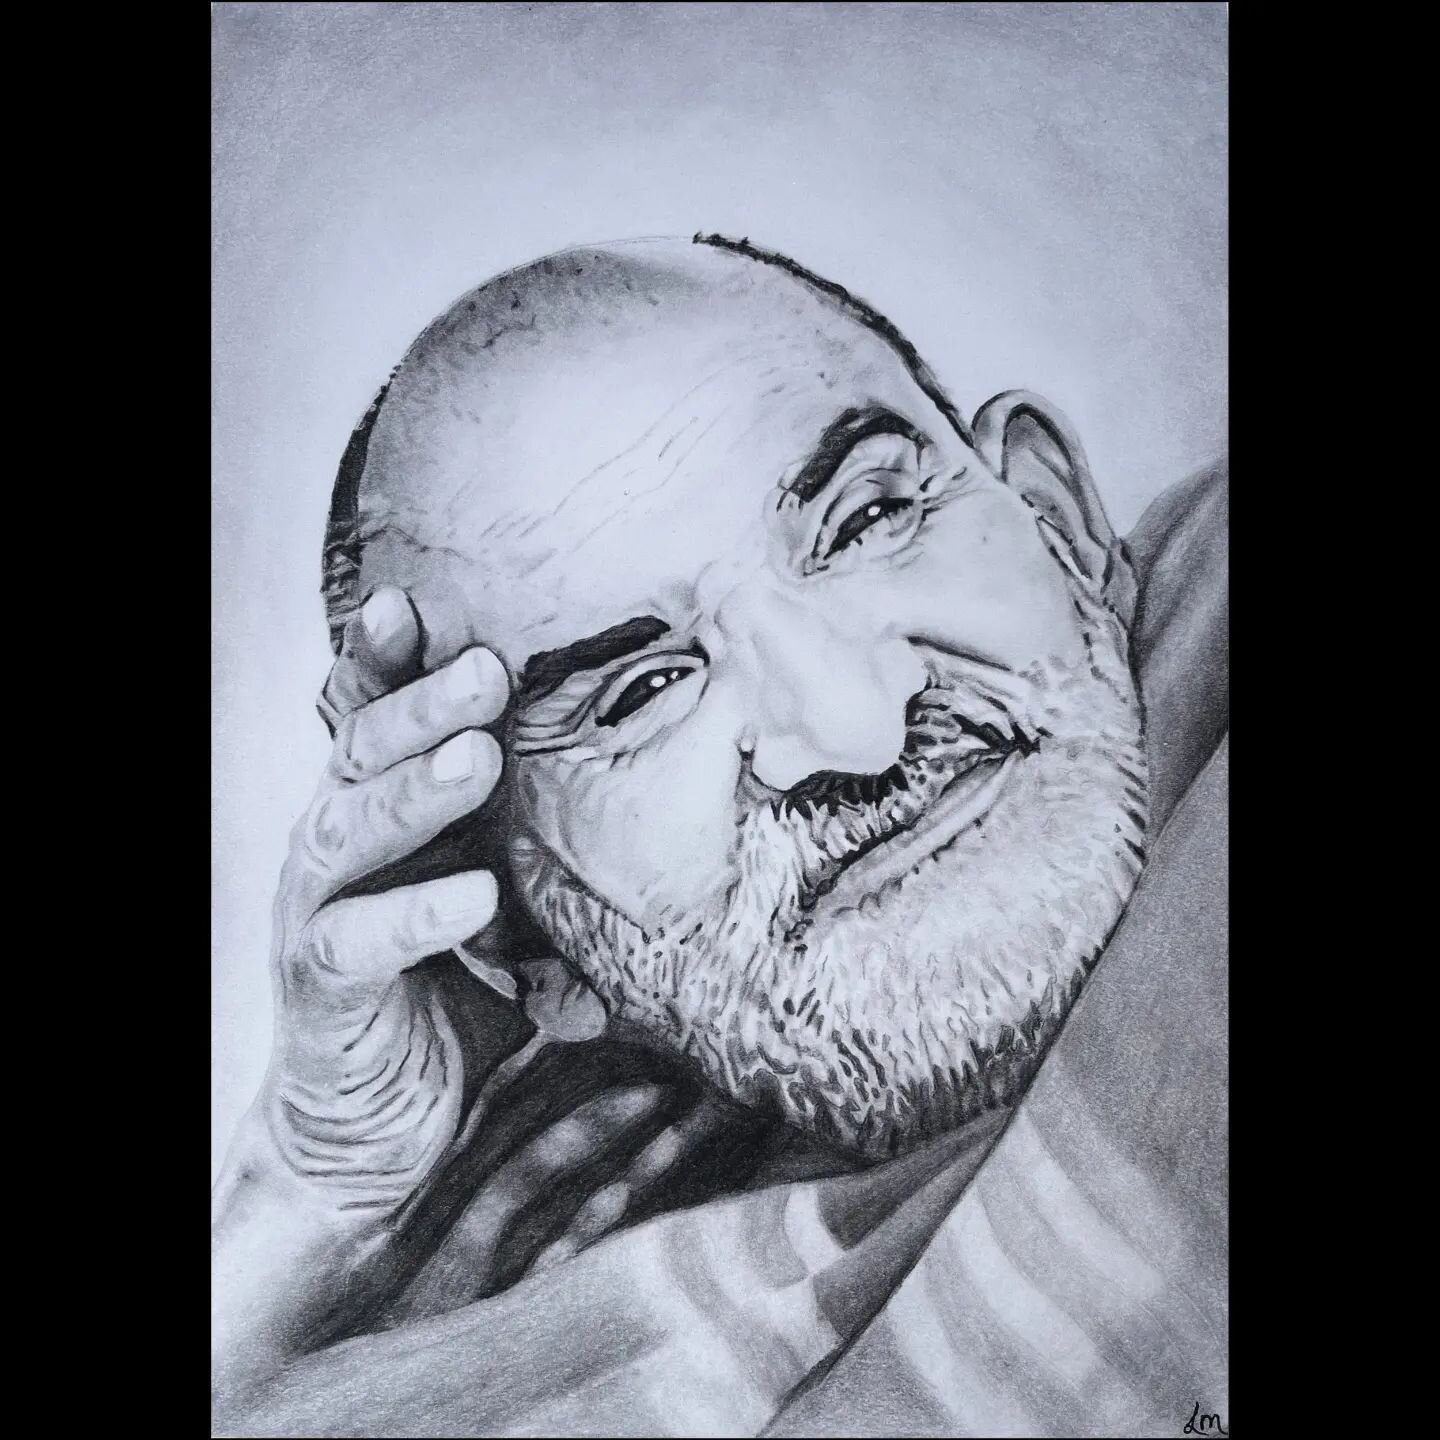 New art prints in the shop on a &quot;pay-what-you-can&quot; basis from our newest featured artist, @lakshmi.merrill

The portrait of Maharaj-ji was created specifically for Ram Dass. When Lakshmi gave this portrait to him, she says, &quot;There was 